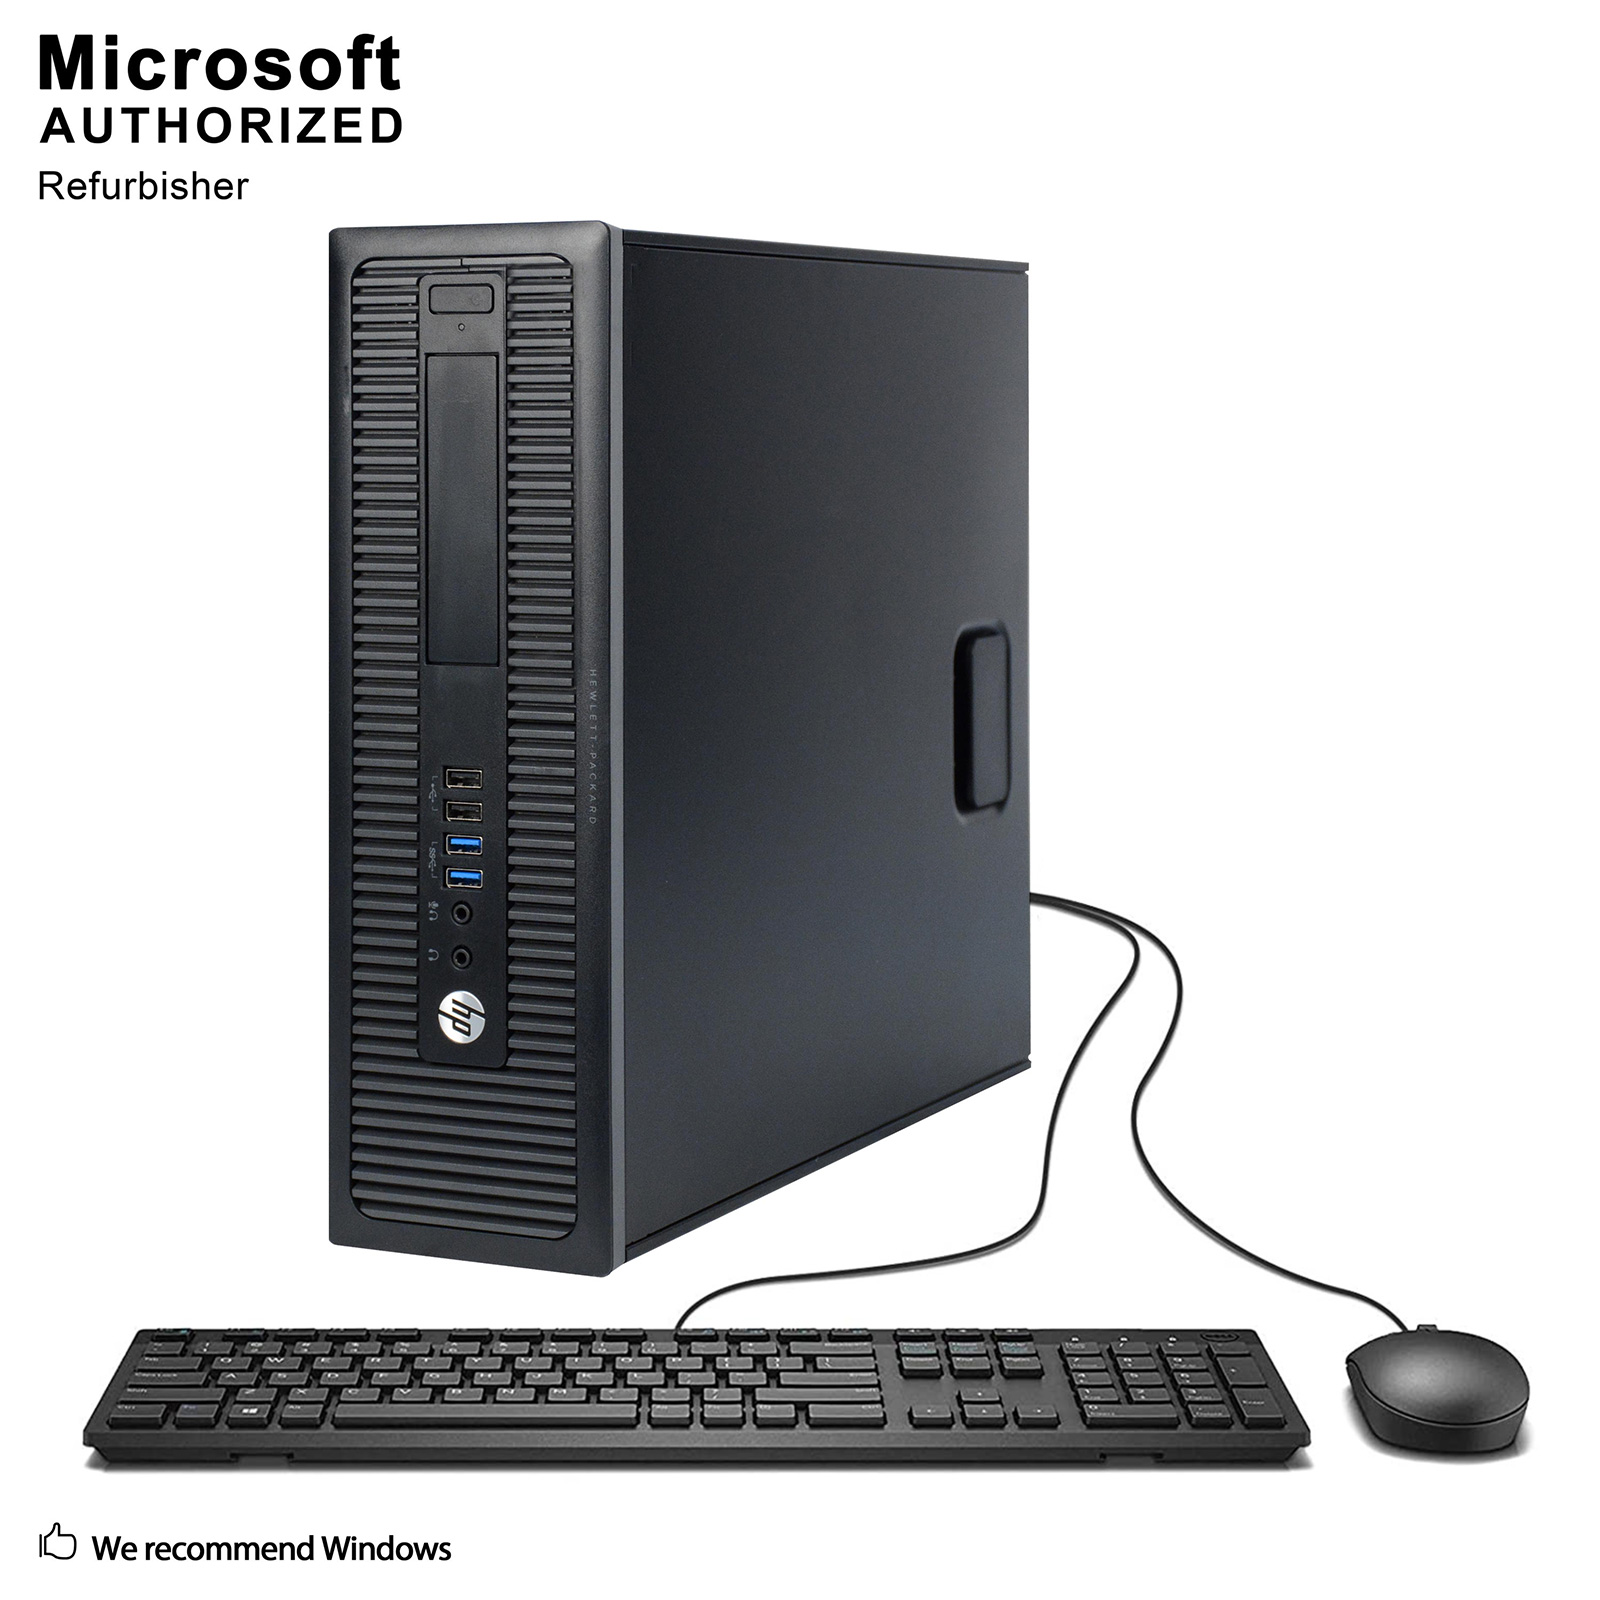 HP ProDesk 600 G1 SFF Desktop PC Intel Quad Core I5-4590 3.3Ghz, 16G DDR3, 1T SSD, VGA, DP, WiFi, Bluetooth, DVDRW, Mouse and Keyboard, Windows 10 Pro 64 Bit Used Grade A - image 1 of 7